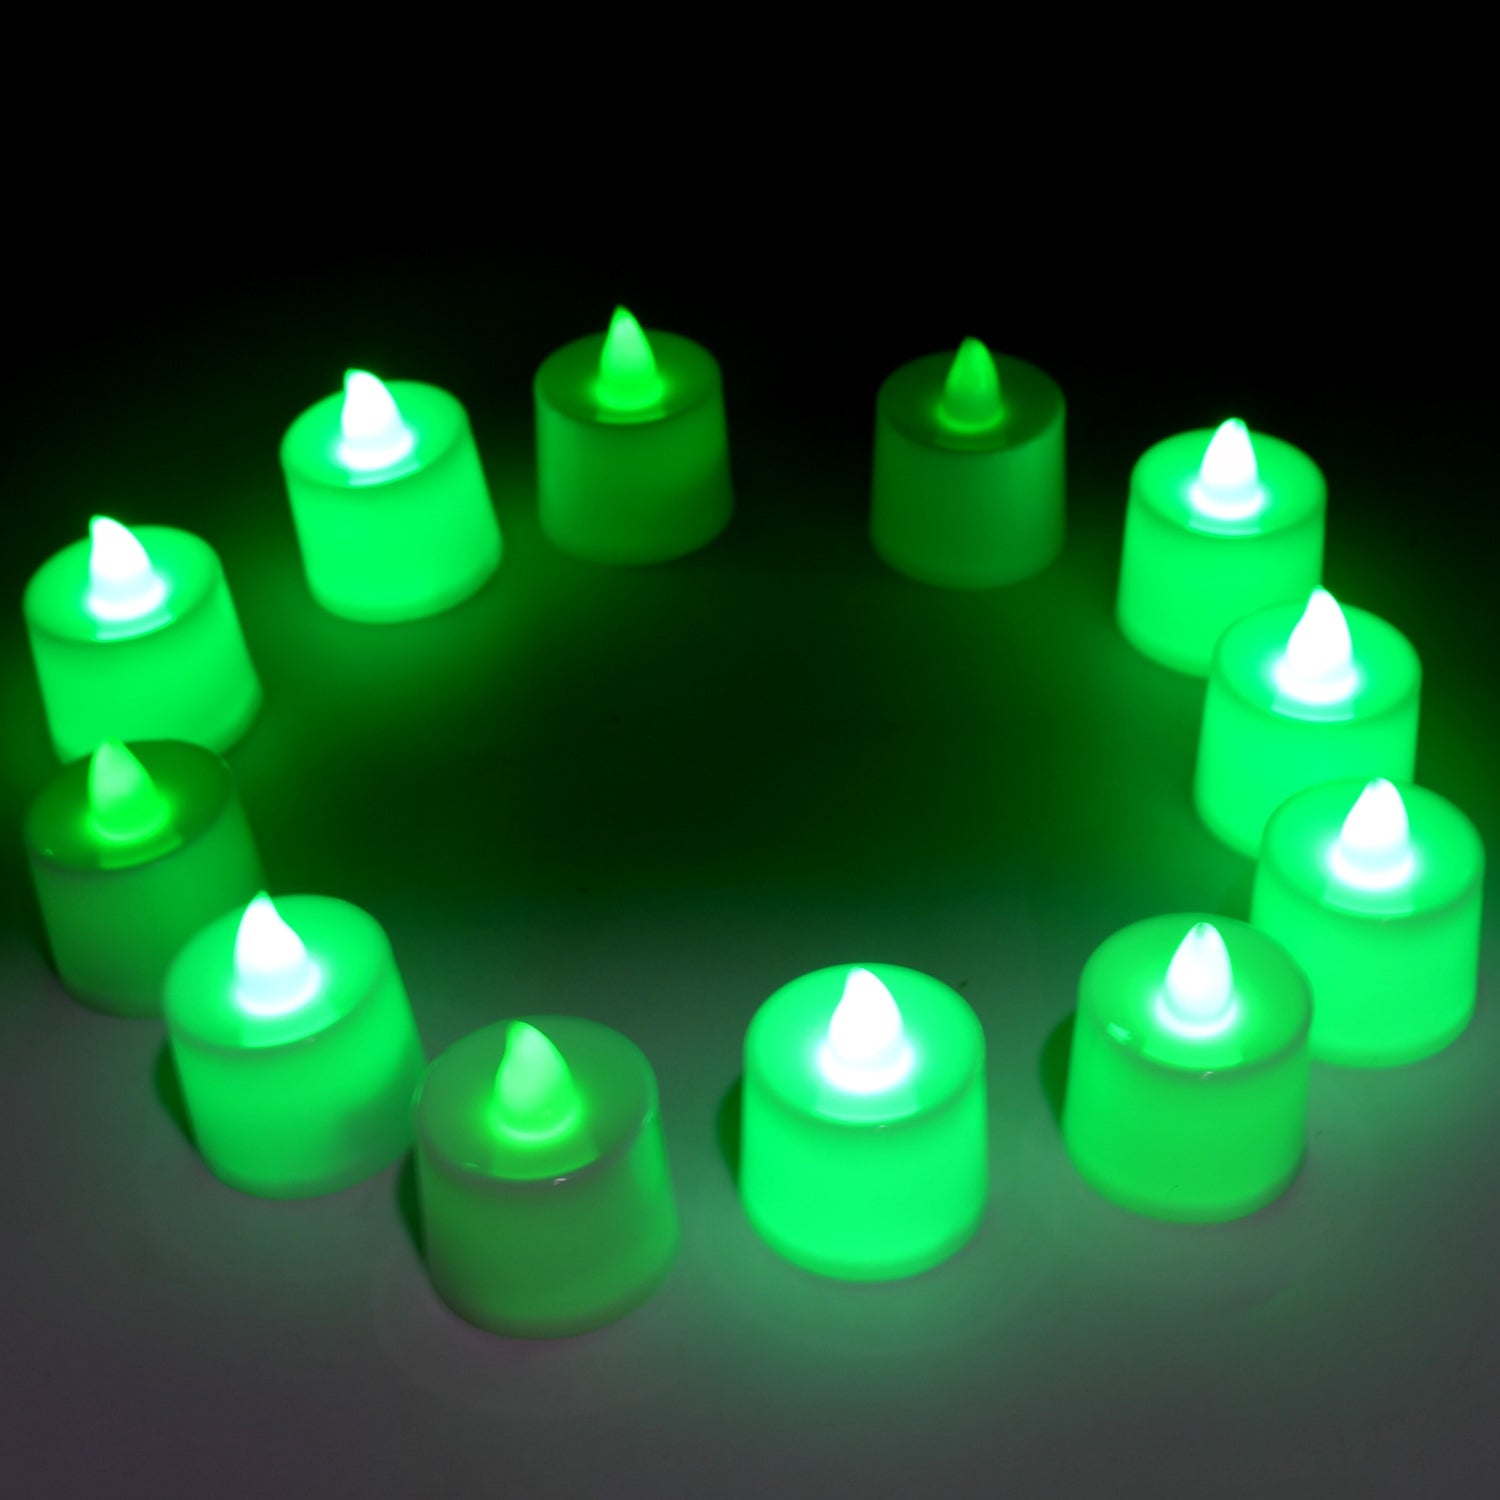 6635b GREEN FLAMELESS LED TEALIGHTS, SMOKELESS PLASTIC DECORATIVE CANDLES - LED TEA LIGHT CANDLE FOR HOME DECORATION (PACK OF 12)